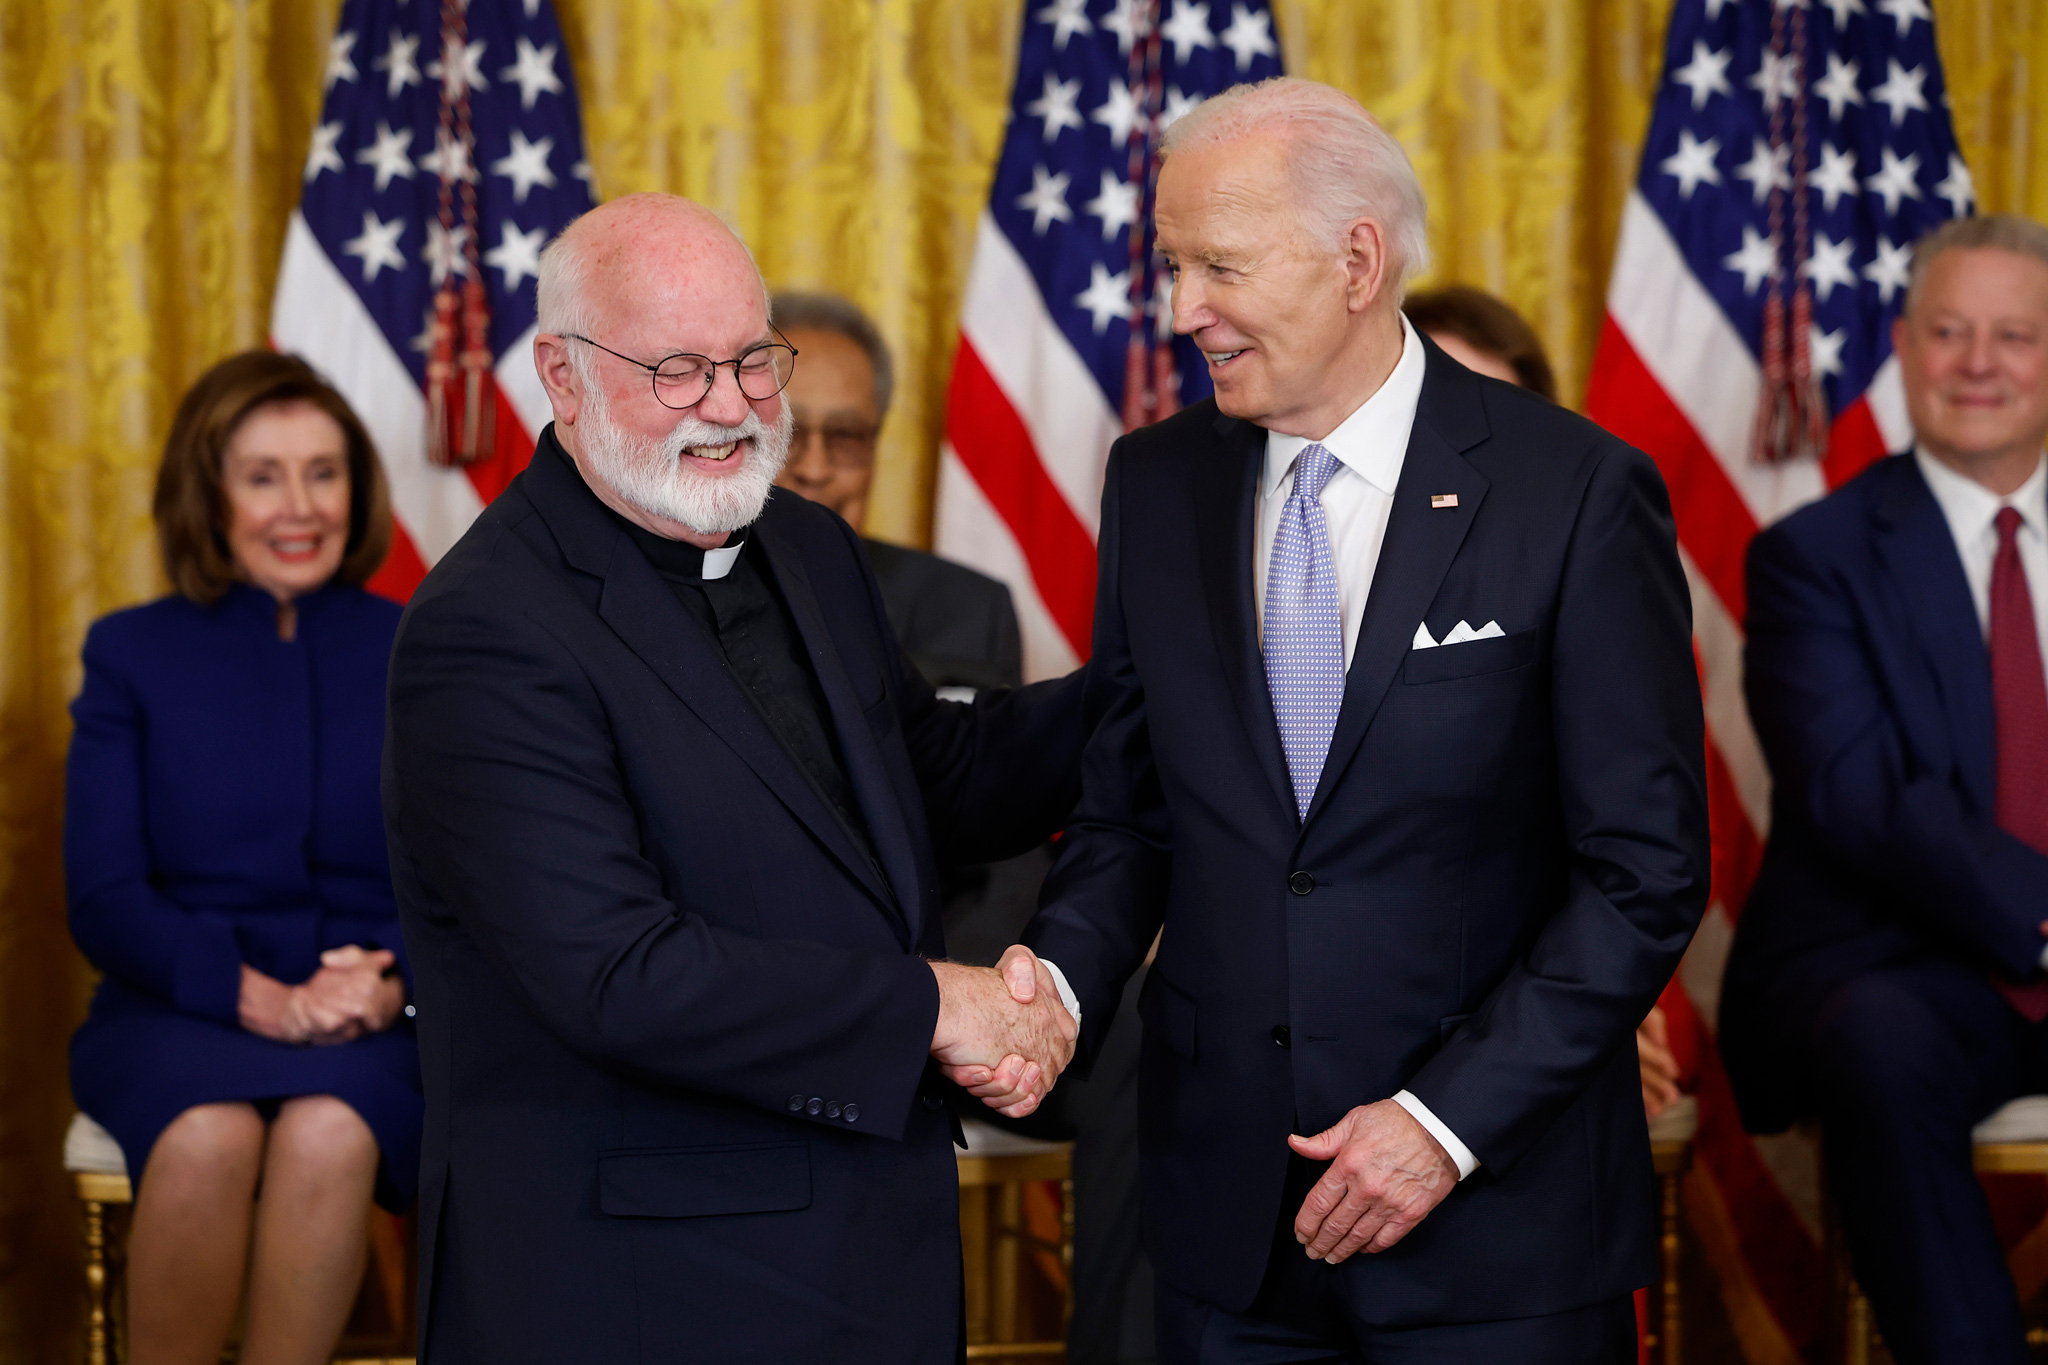 Father Gregory Boyle, S.J. is a Recipient of The Presidential Medal of Freedom